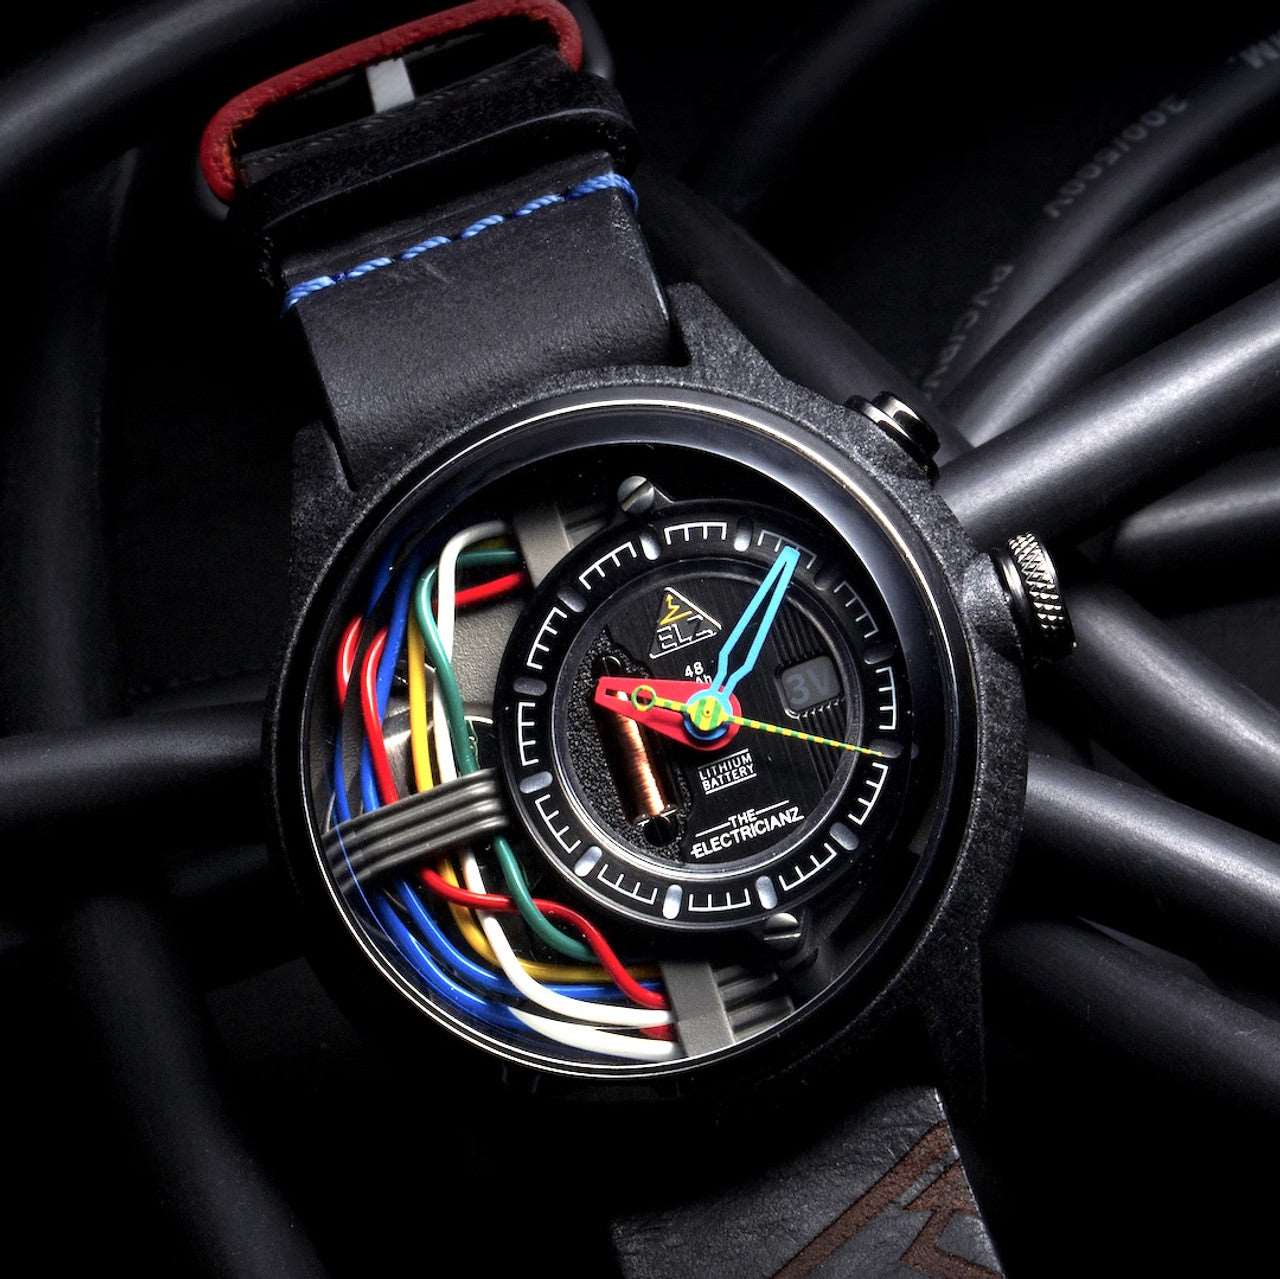 The Electricianz Carbon Z 42mm Black Rubber | Watches.com